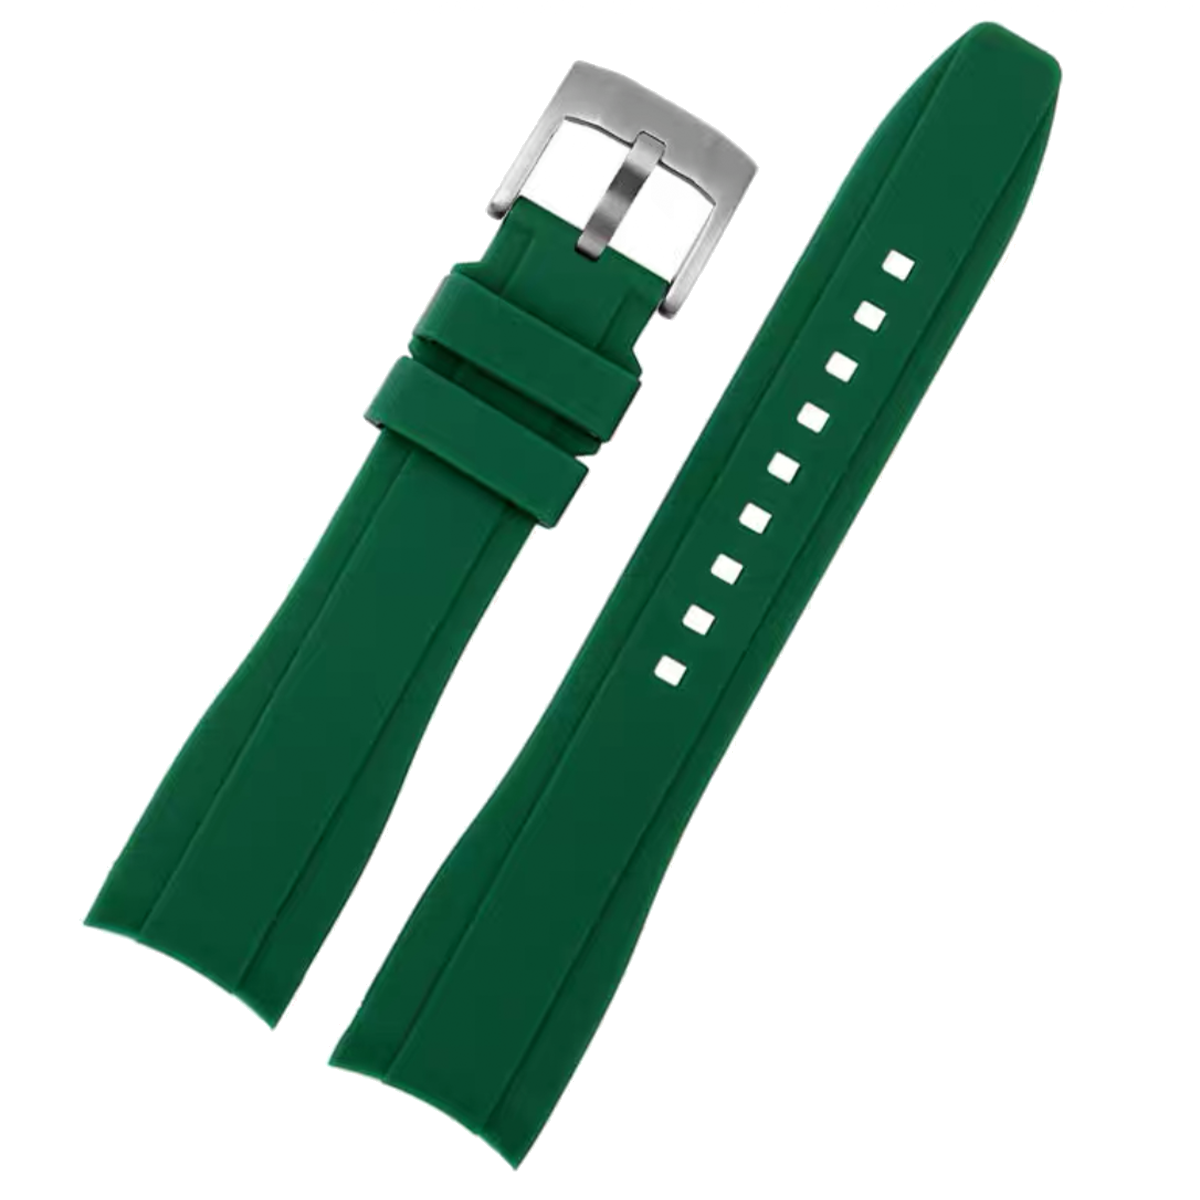 Dexter Silicone Curved Lug End Watch Strap Black (Rolex Replacement) 